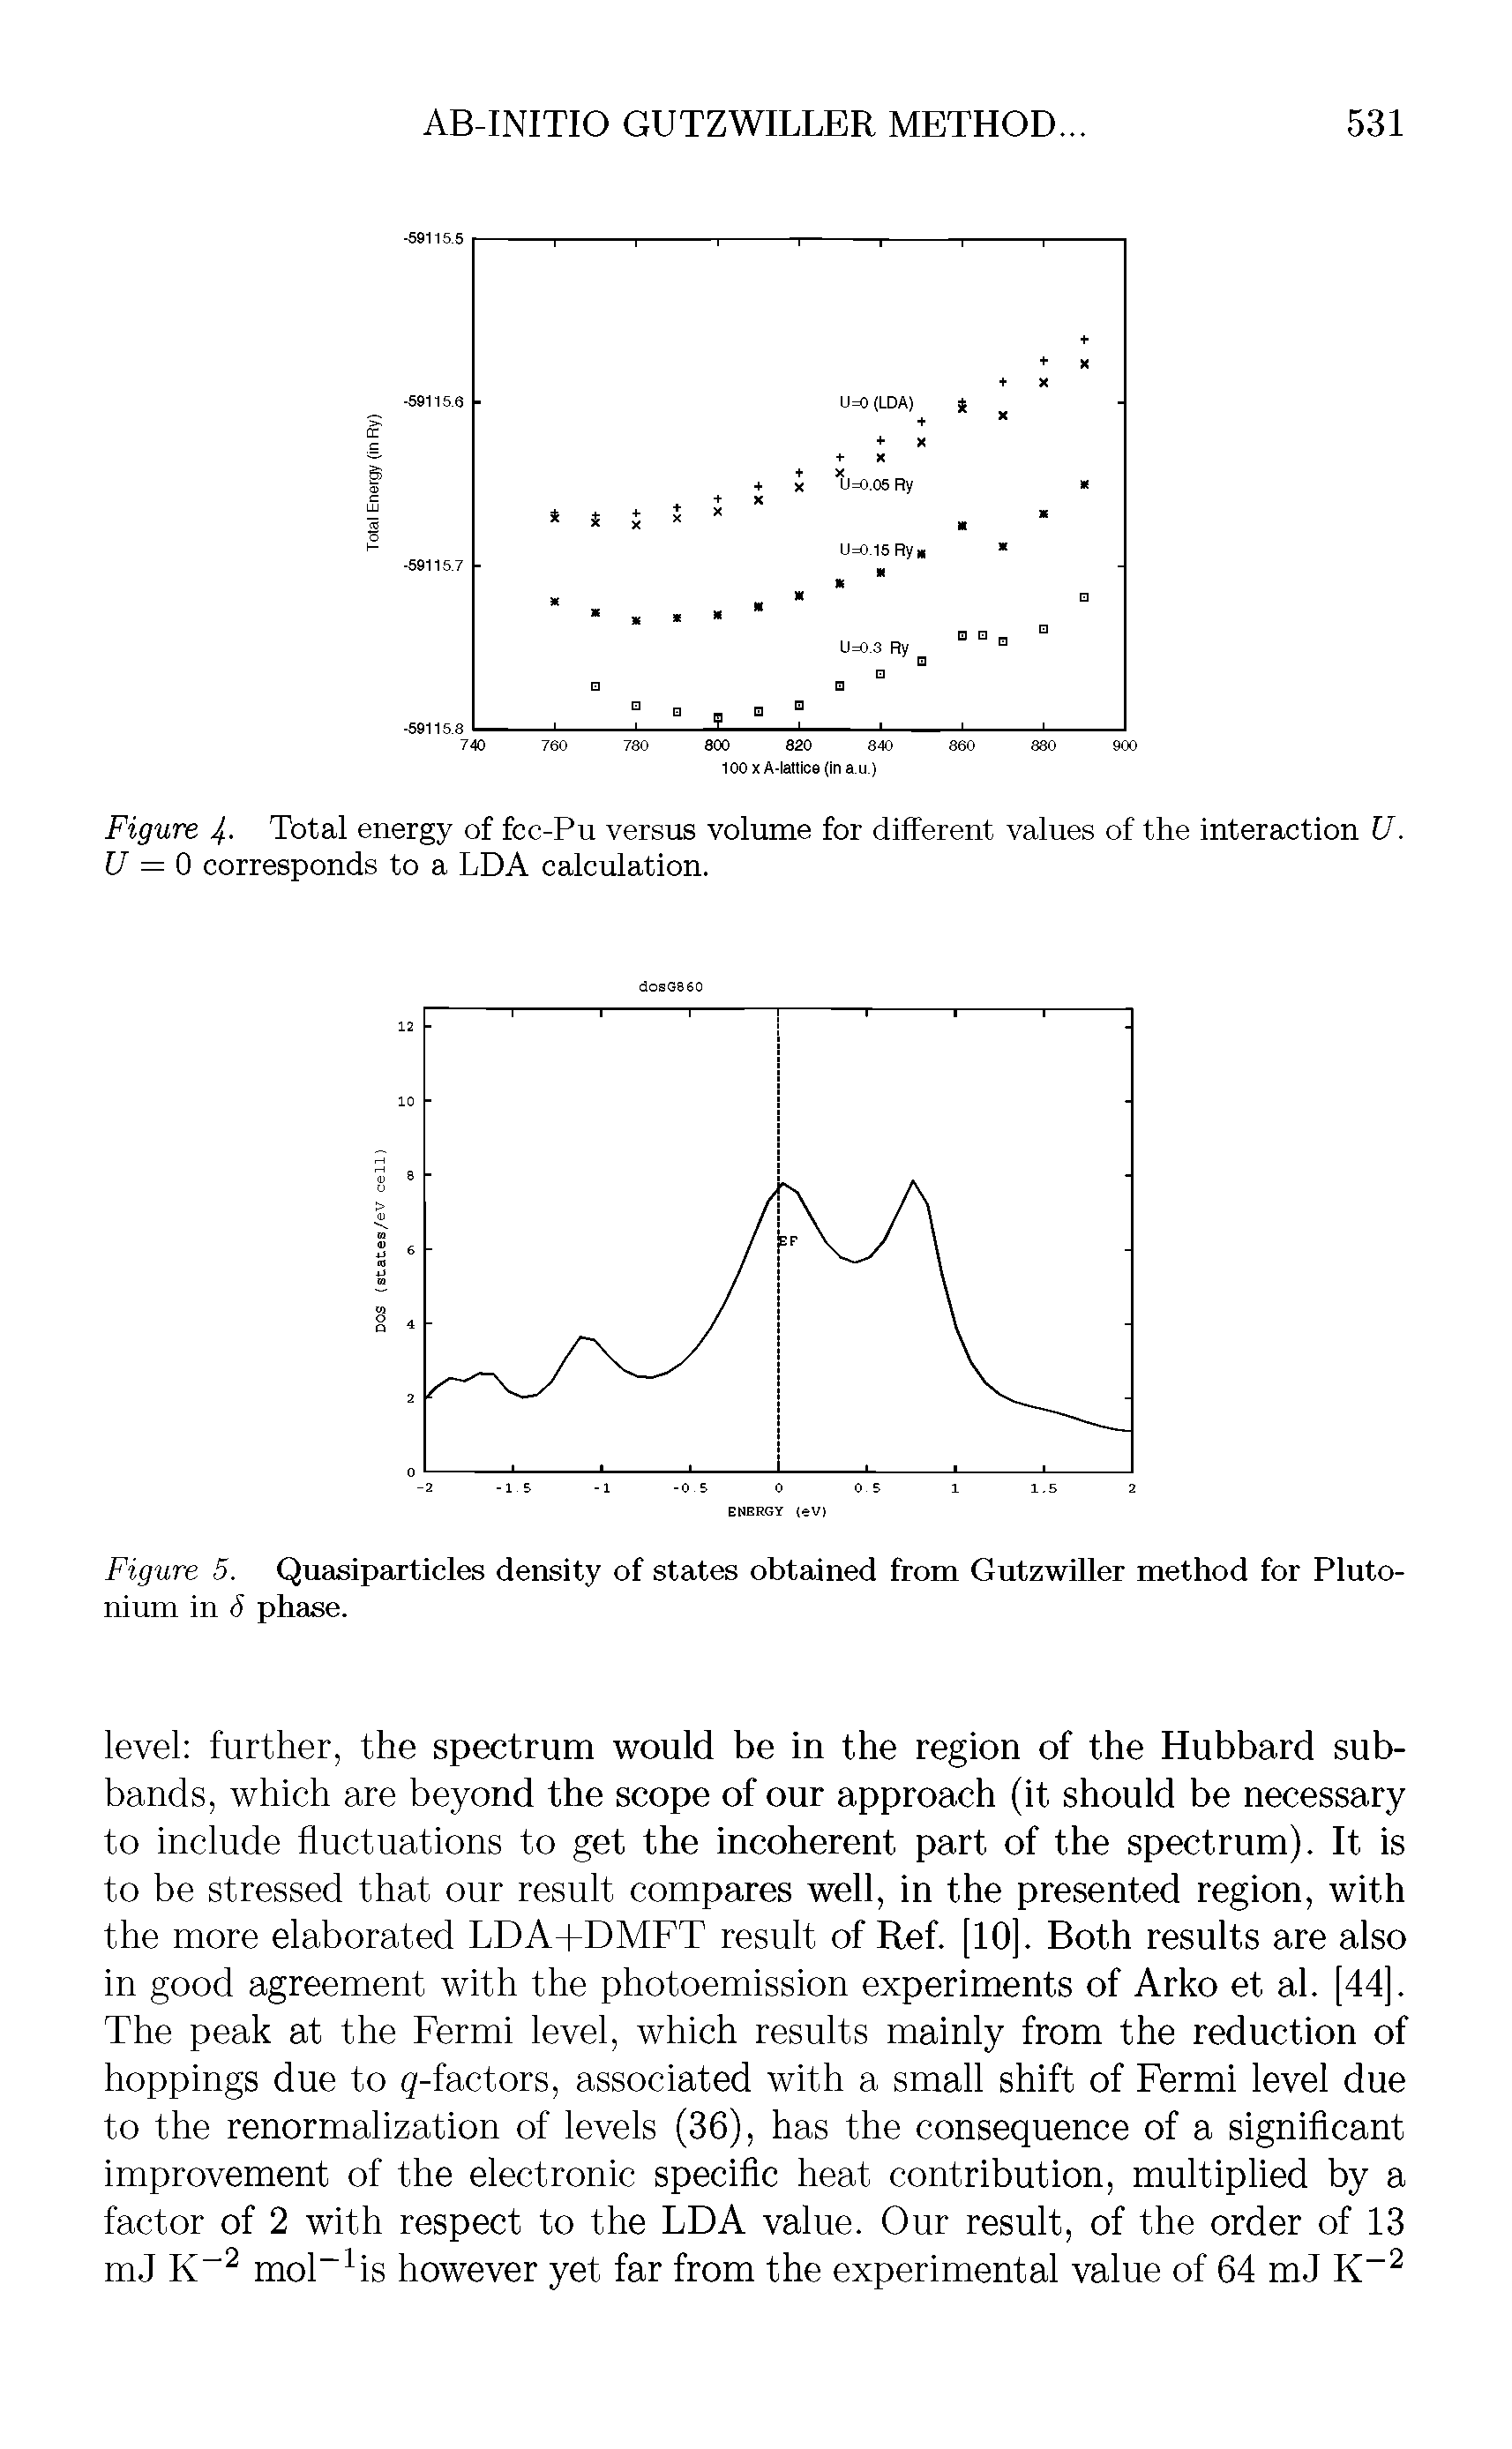 Figure 4- Total energy of fcc-Pu versus volume for different values of the interaction U. U = 0 corresponds to a LDA calculation.